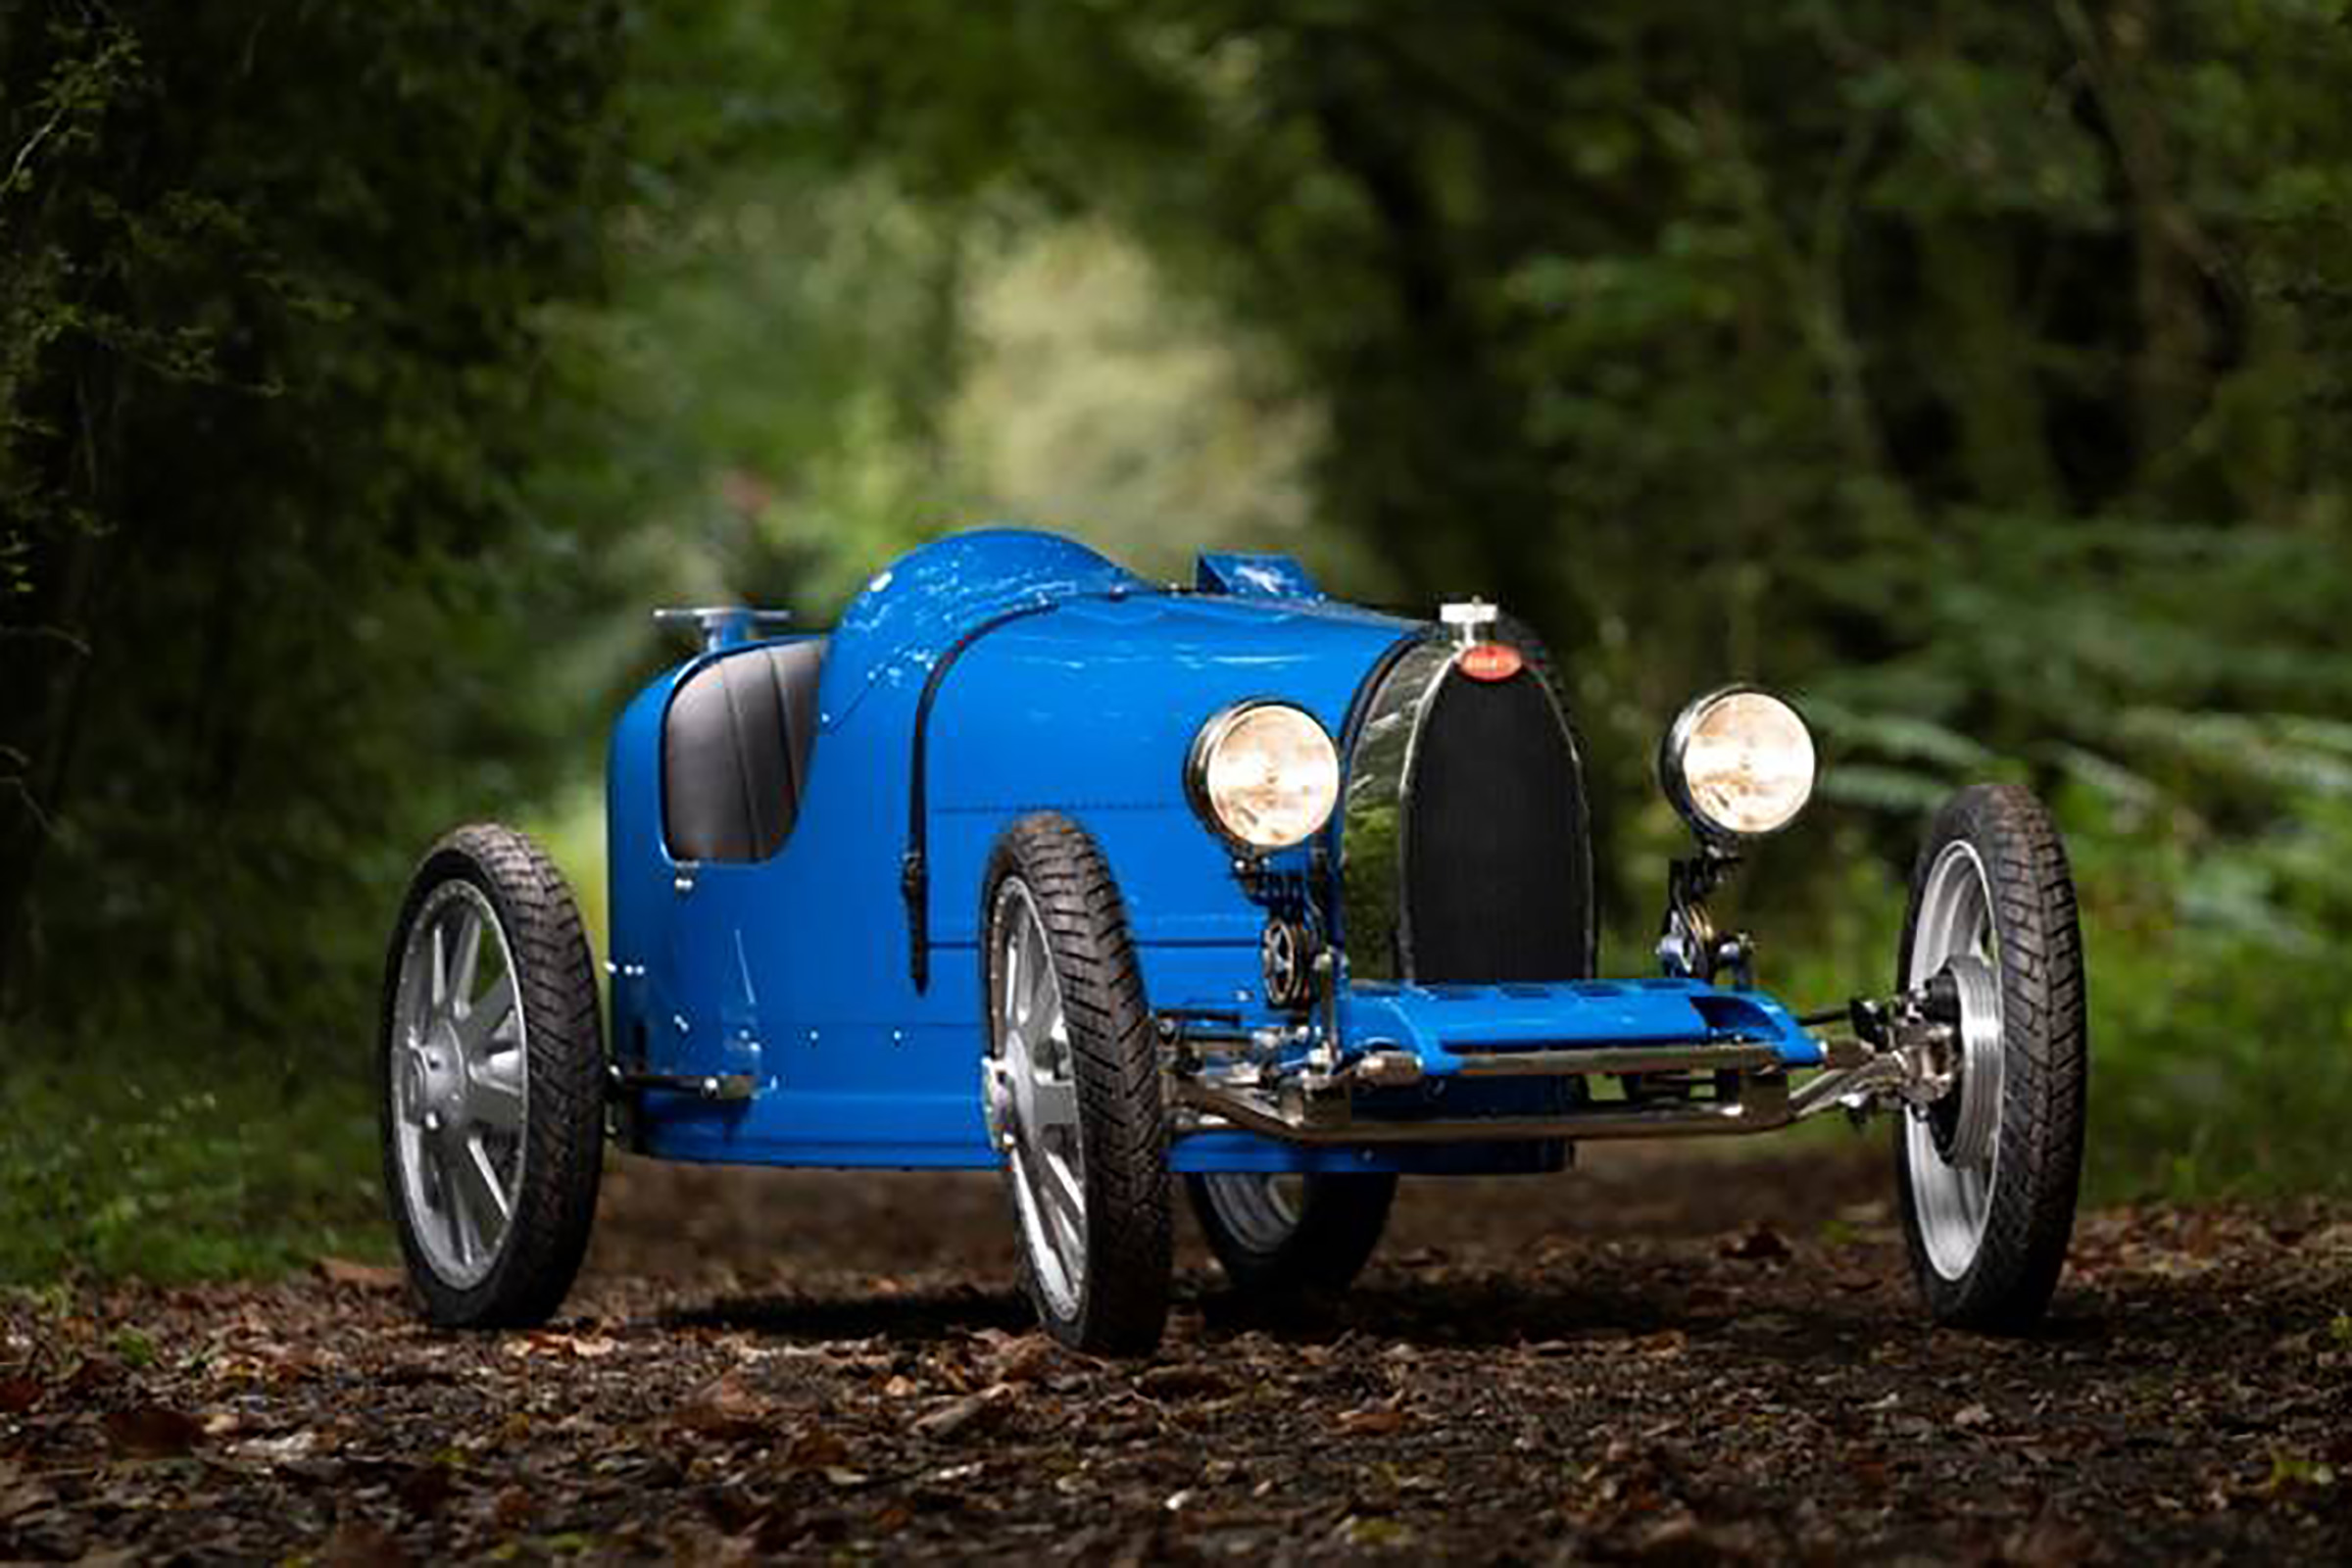 £27k Bugatti Baby II toy car launched: a racing icon, only smaller